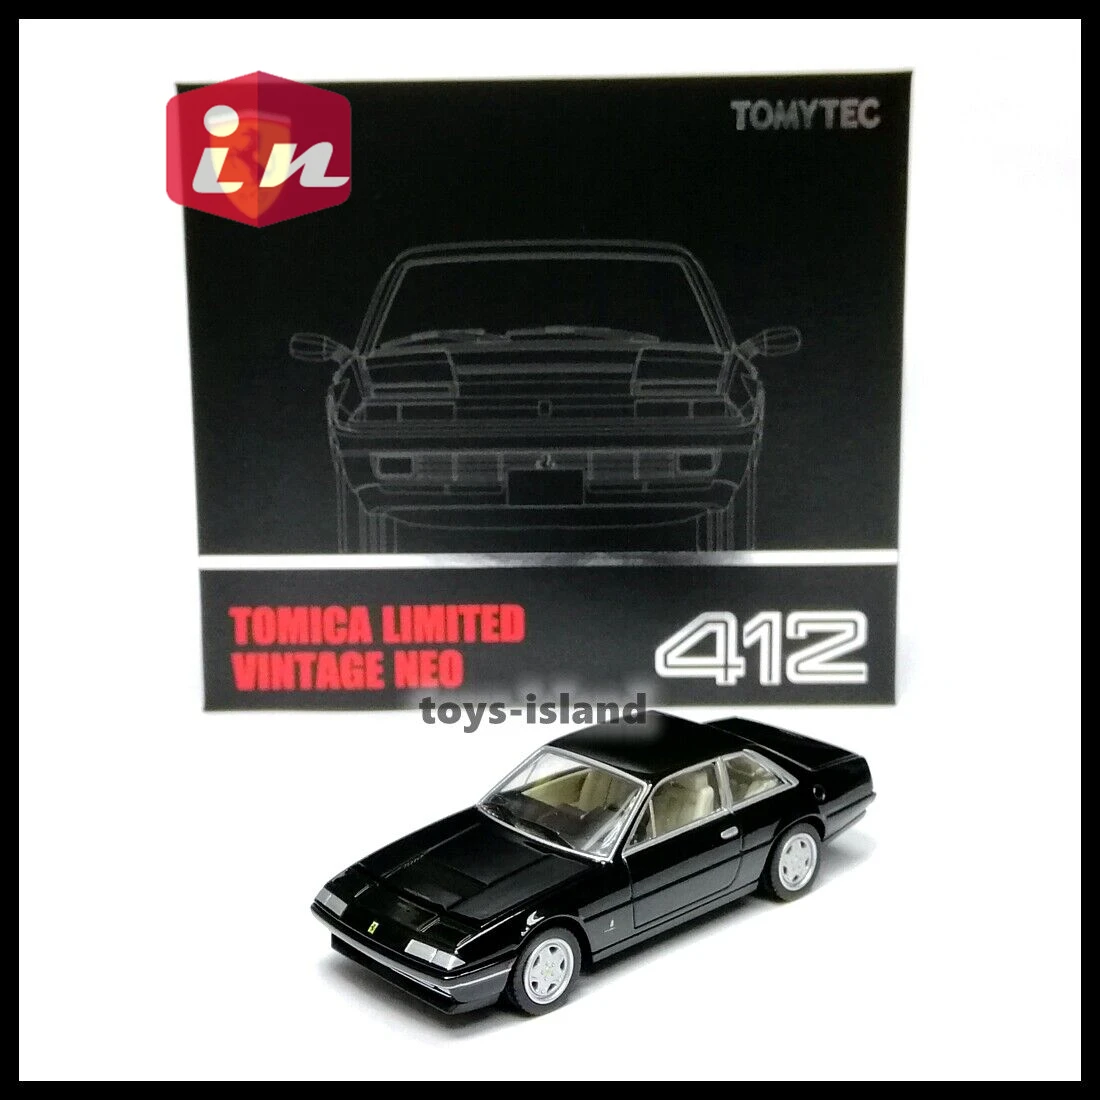 

Tomica Limited Vintage NEO TLV 412 ( black ) 1/64 TOMYTEC TOMY DieCast Model Car Collection Limited Edition Hobby Toys